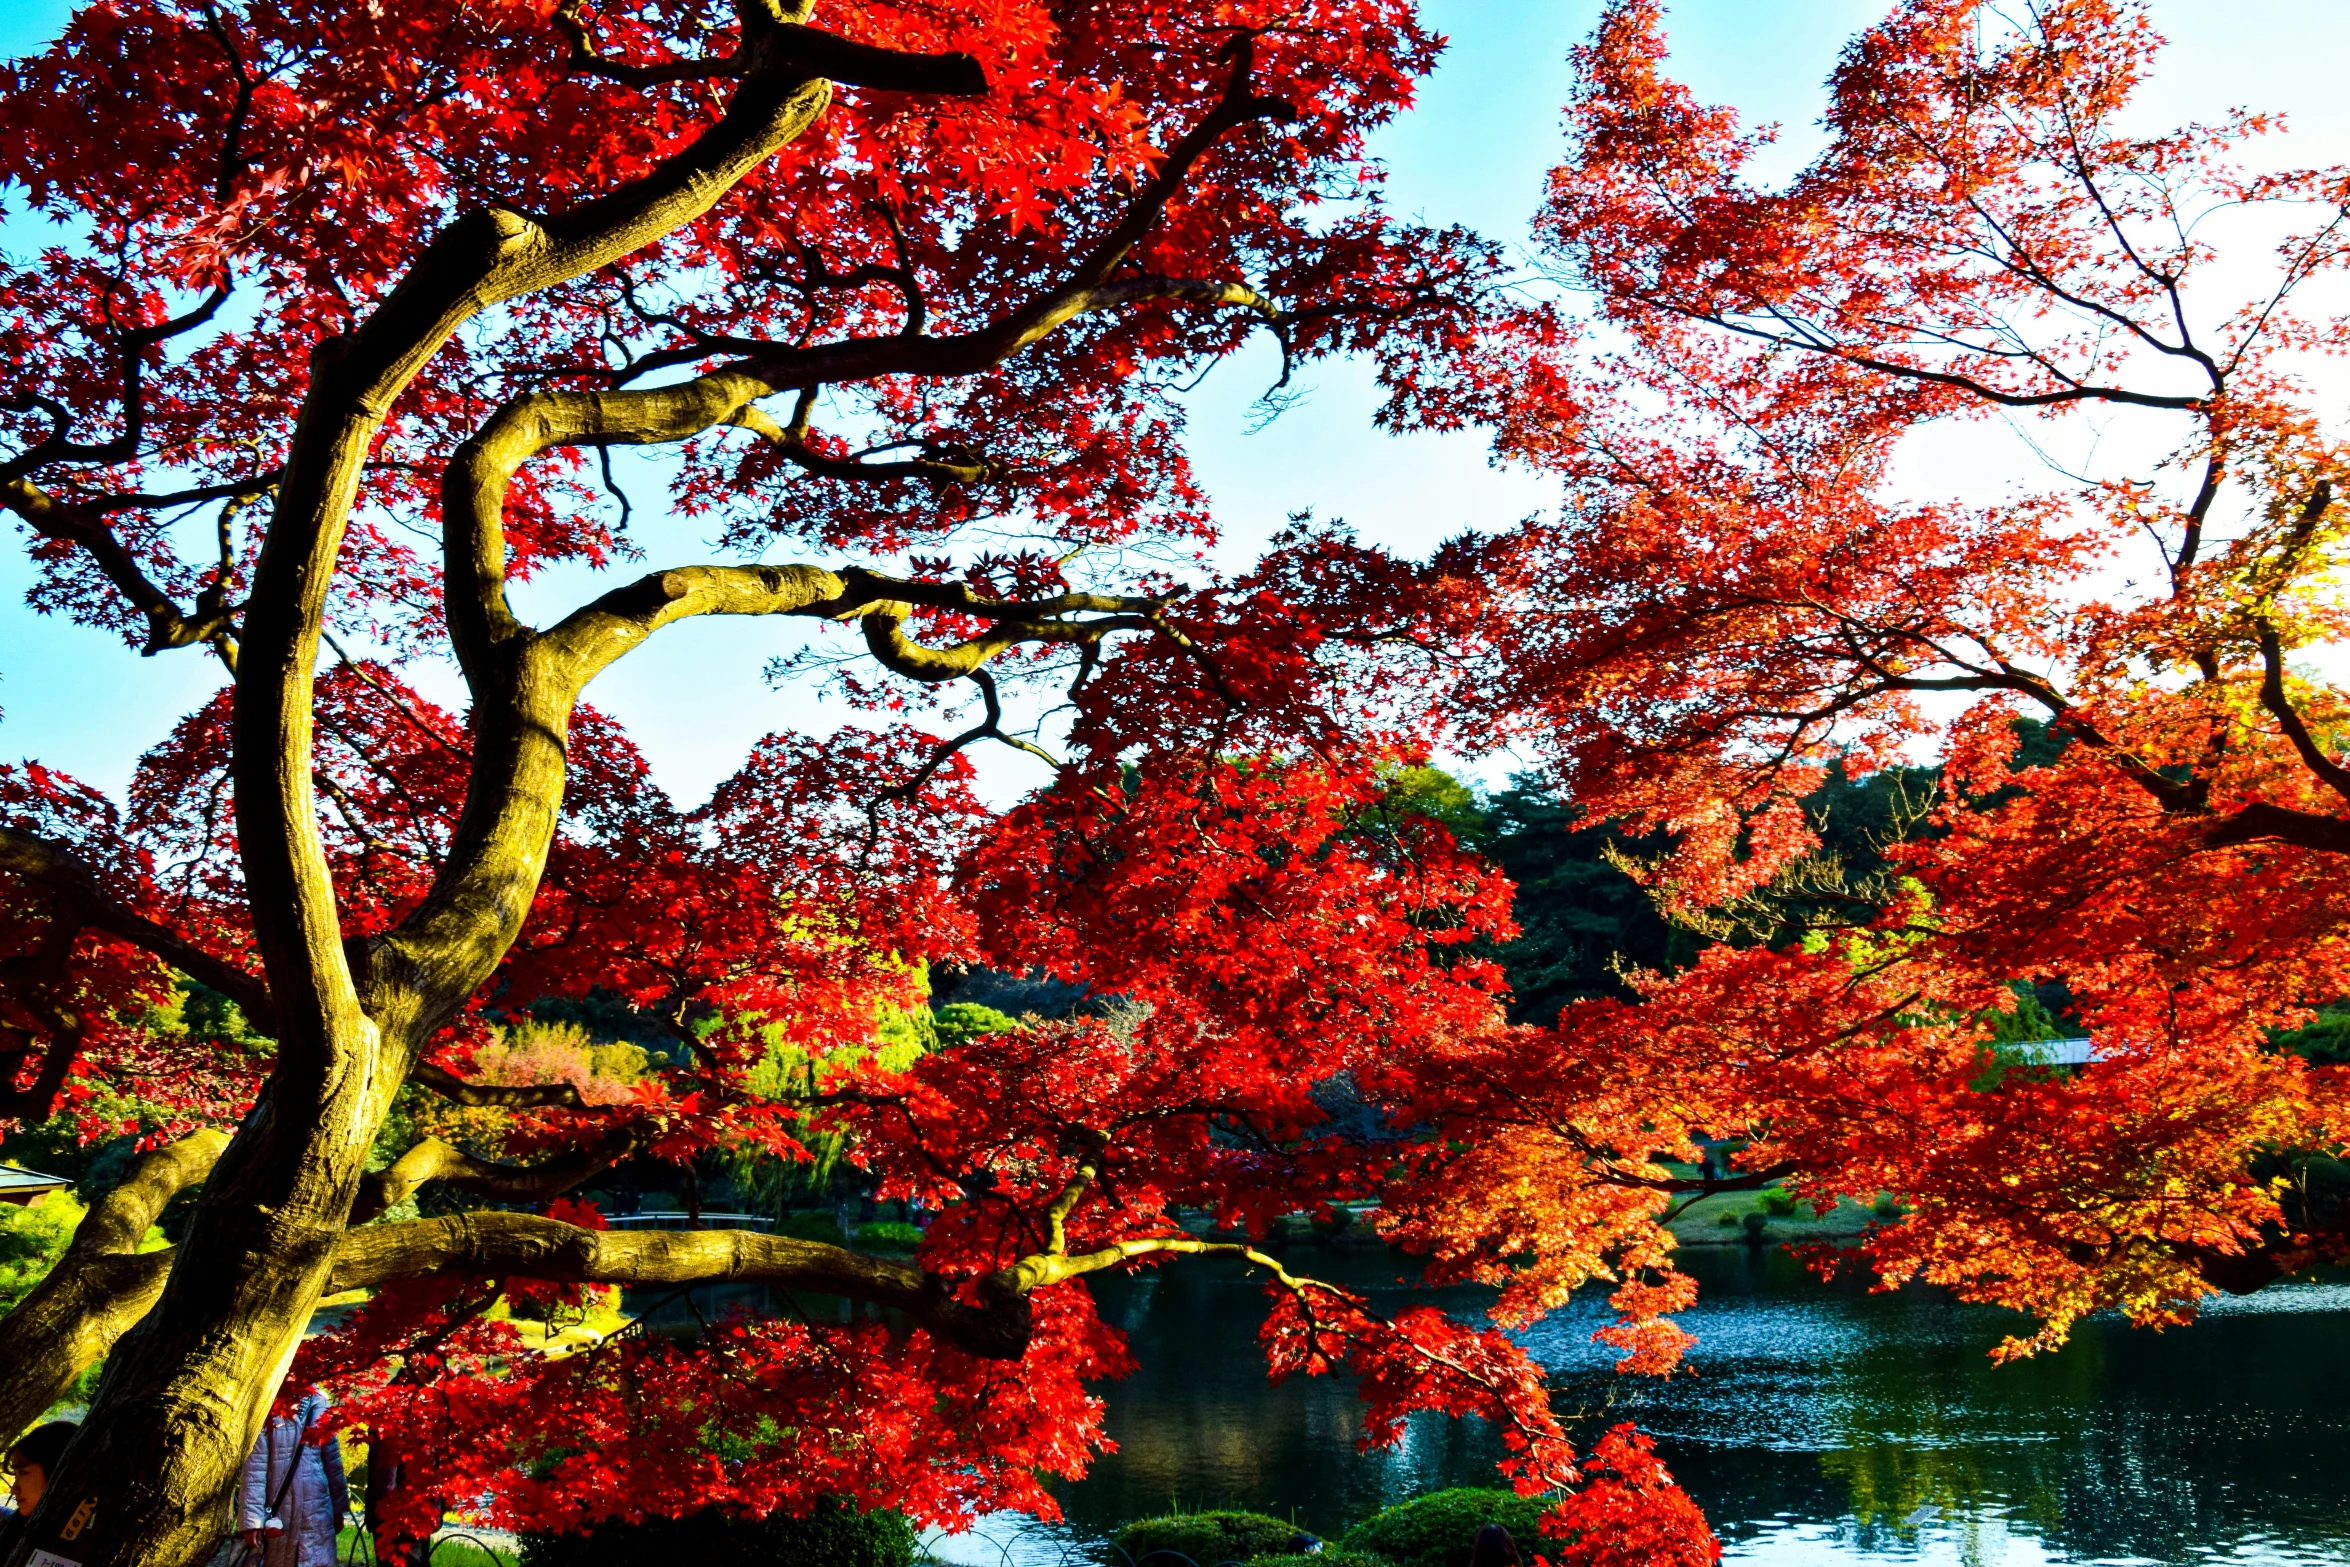 the colorful red trees and foliage are shown here